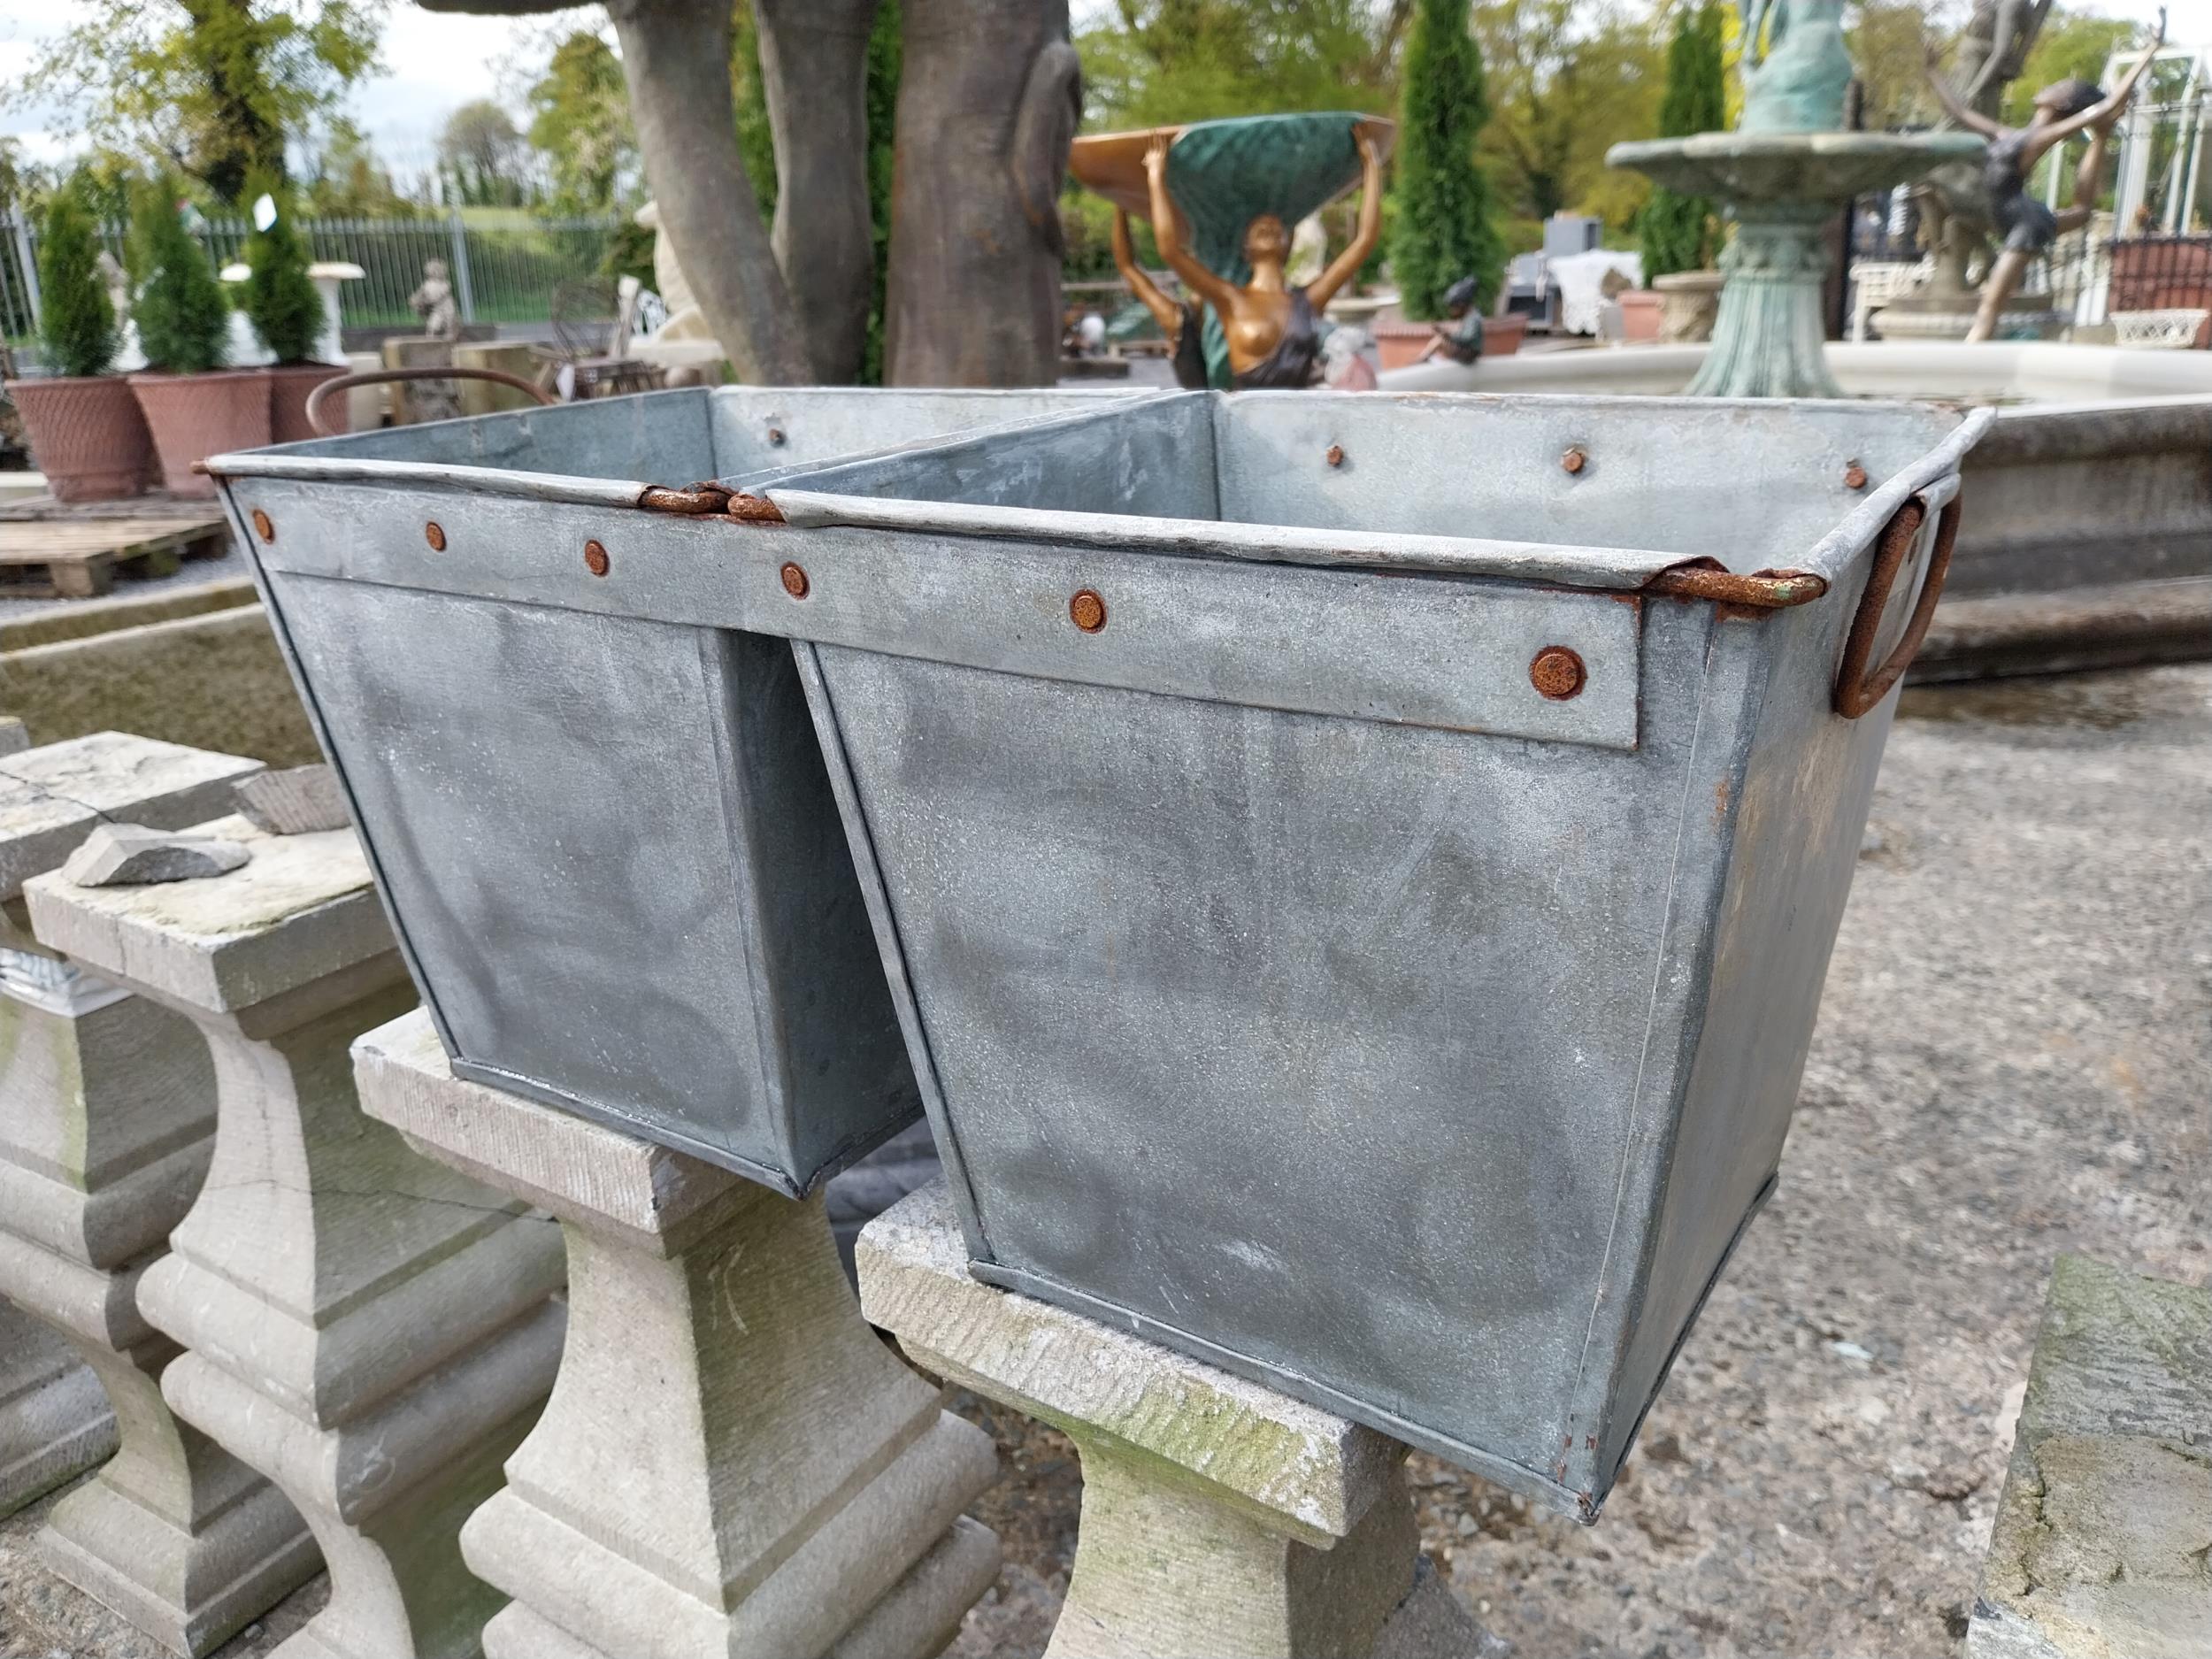 Pair of galvanised double planters with handles {27 cm H x 59 cm W x 28 cm D}. - Image 2 of 3